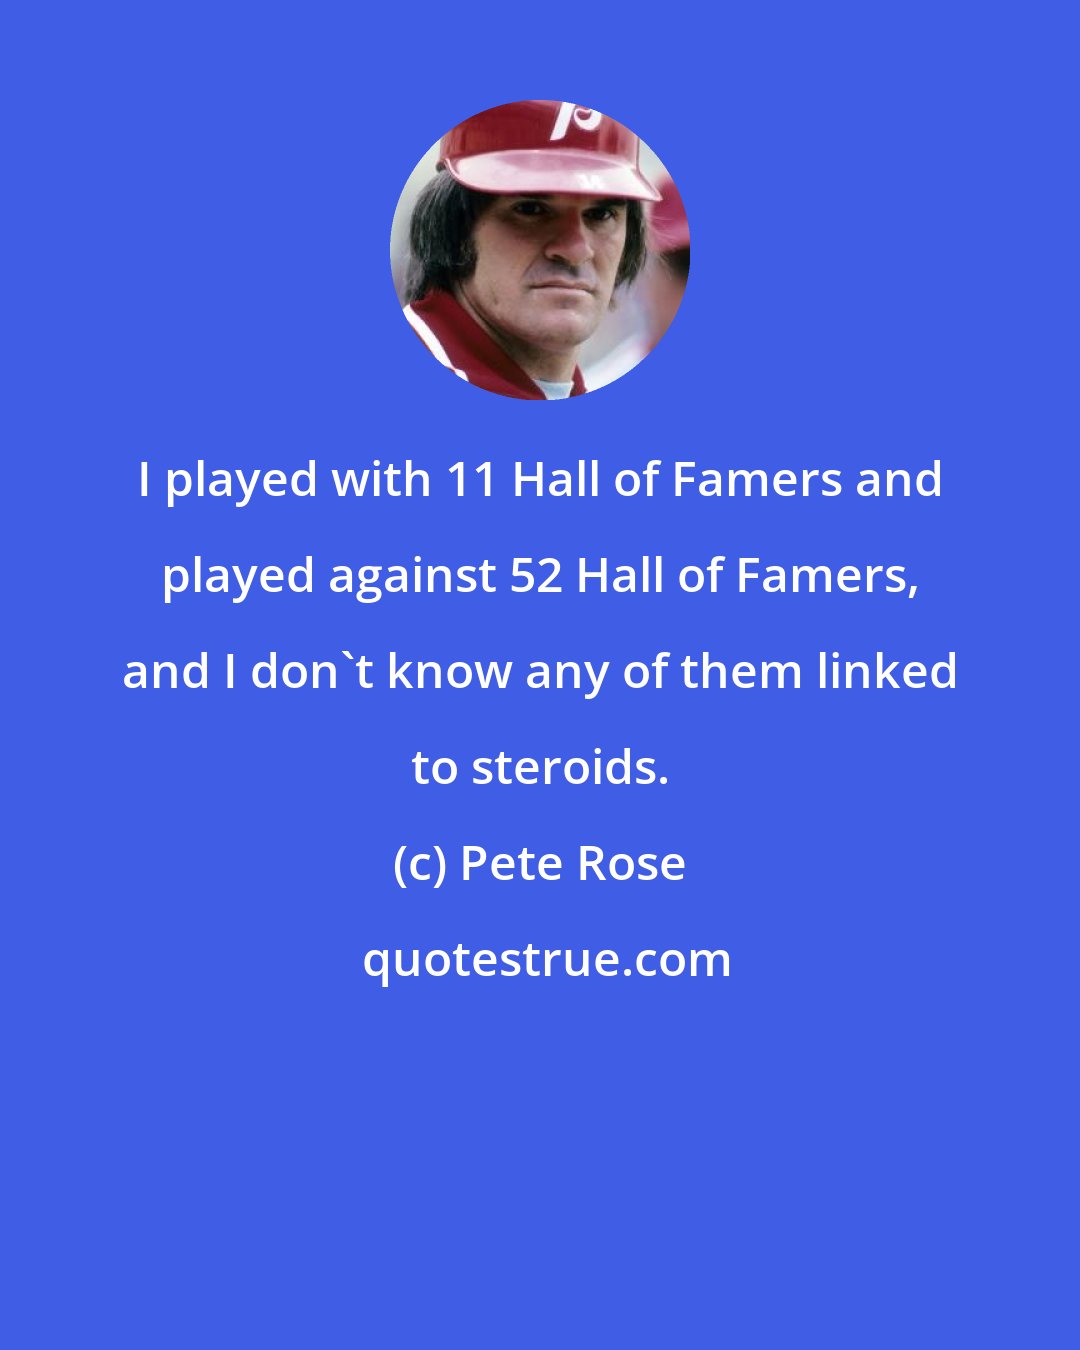 Pete Rose: I played with 11 Hall of Famers and played against 52 Hall of Famers, and I don't know any of them linked to steroids.